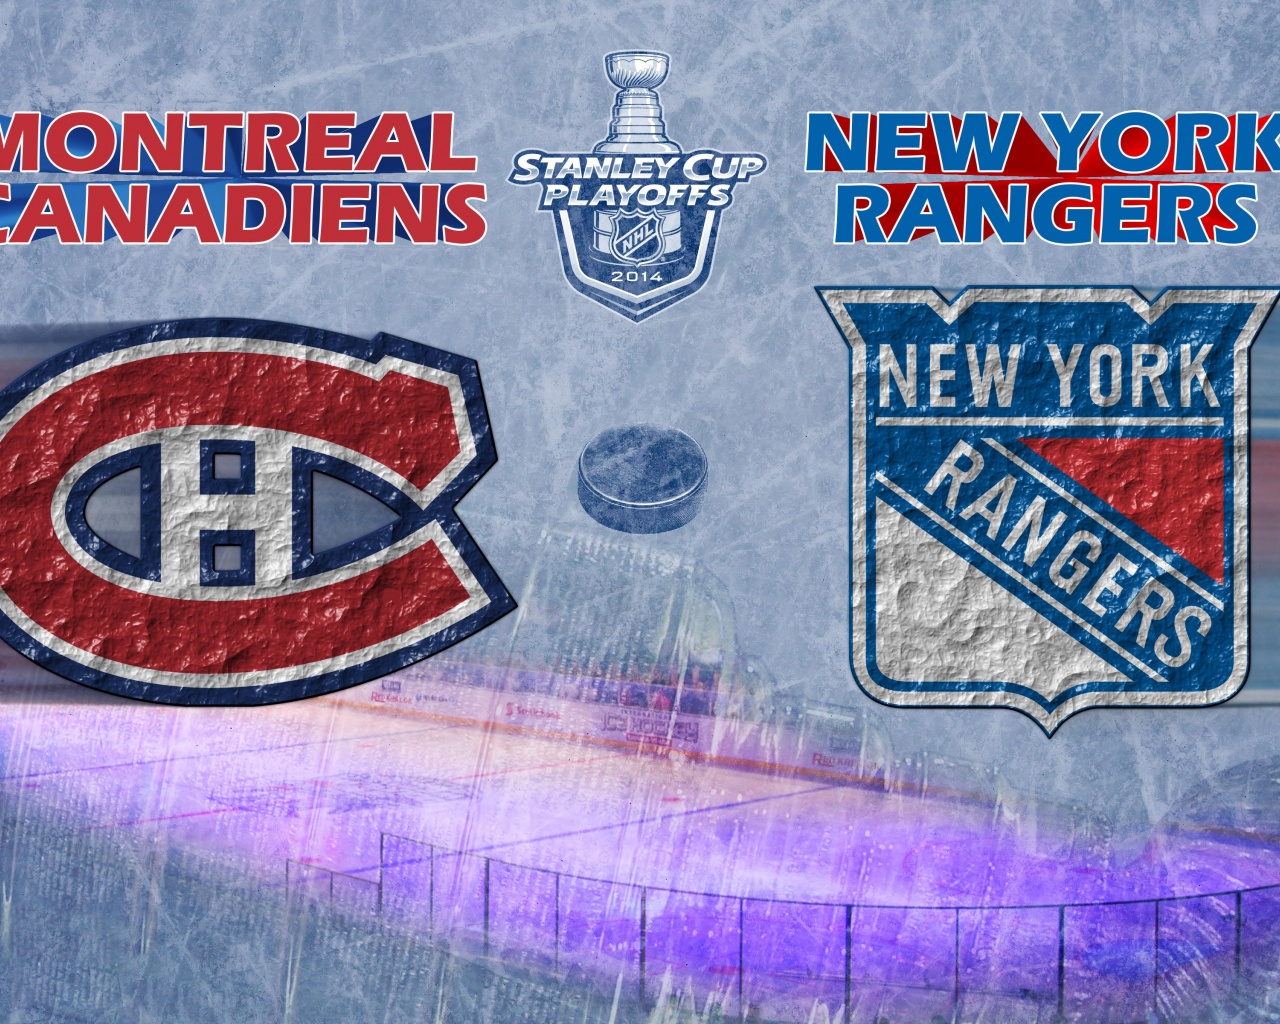 Canadiens V Rangers 2014 Stanley Cup